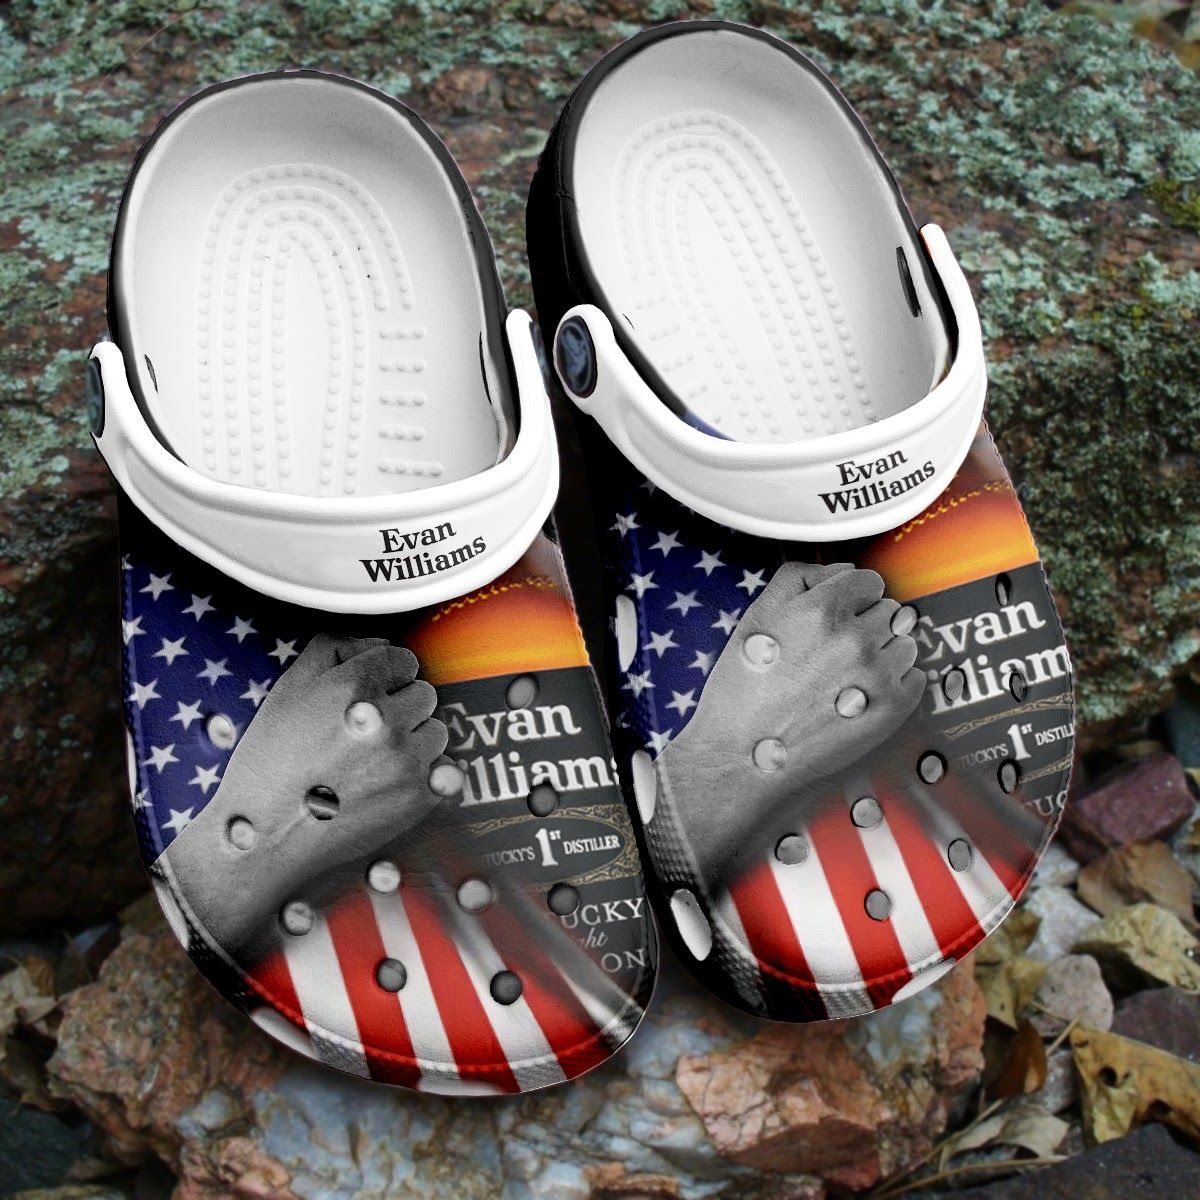 If you'd like to purchase a pair of Crocband Clogs, be sure to check out the official website. 135